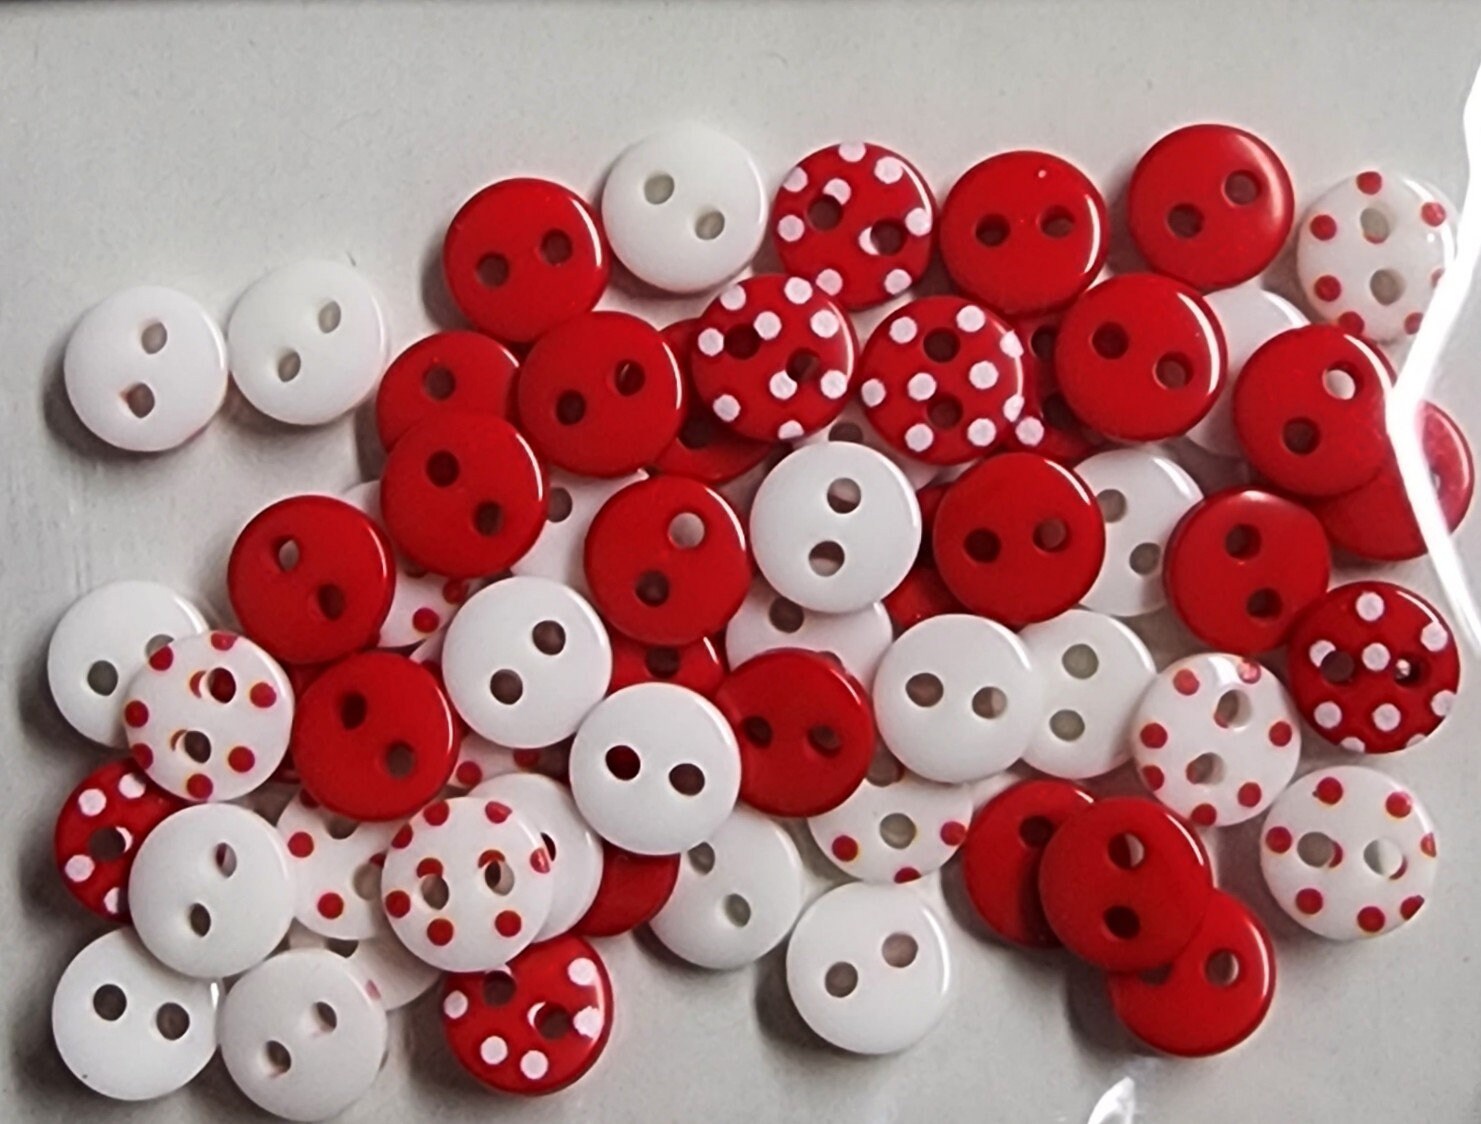 25mm Black Buttons Bulk, 2 Hole Buttons for Sewing, 1 Plastic